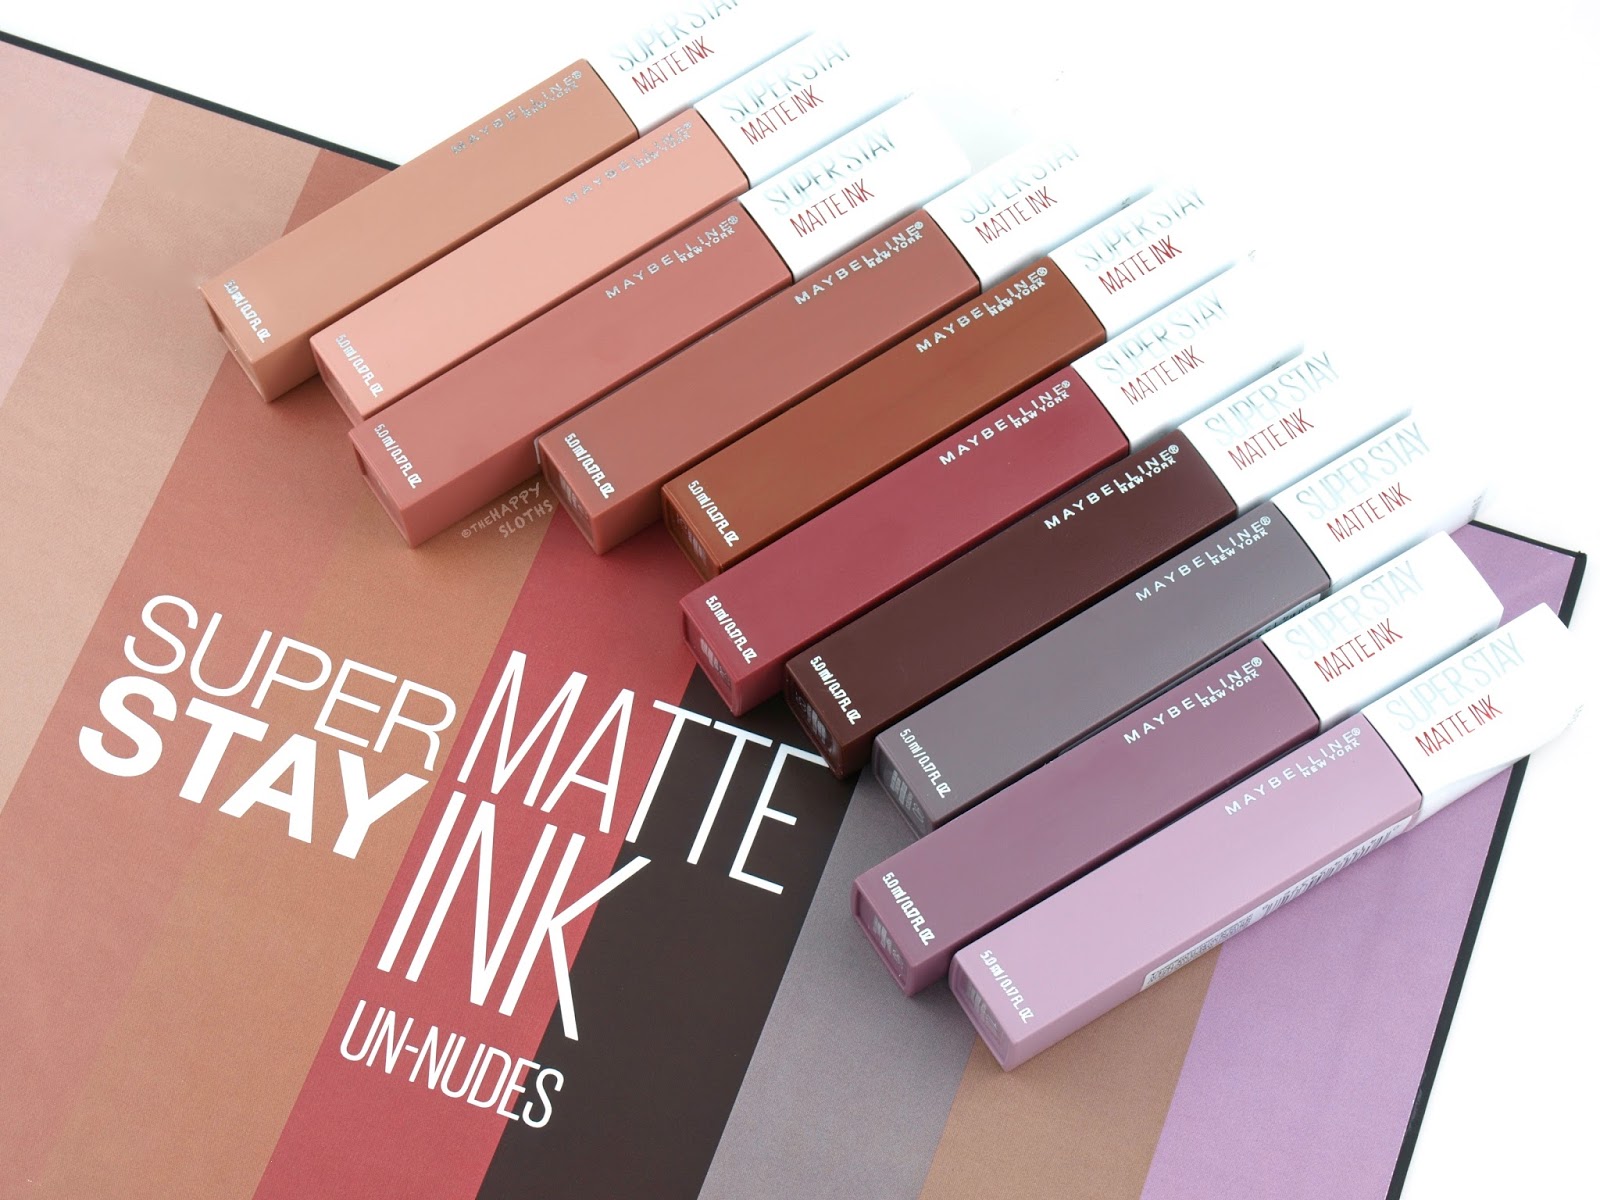 Maybelline | SuperStay Matte Ink Un-Nudes Collection: Review and Swatches |  The Happy Sloths: Beauty, Makeup, and Skincare Blog with Reviews and  Swatches